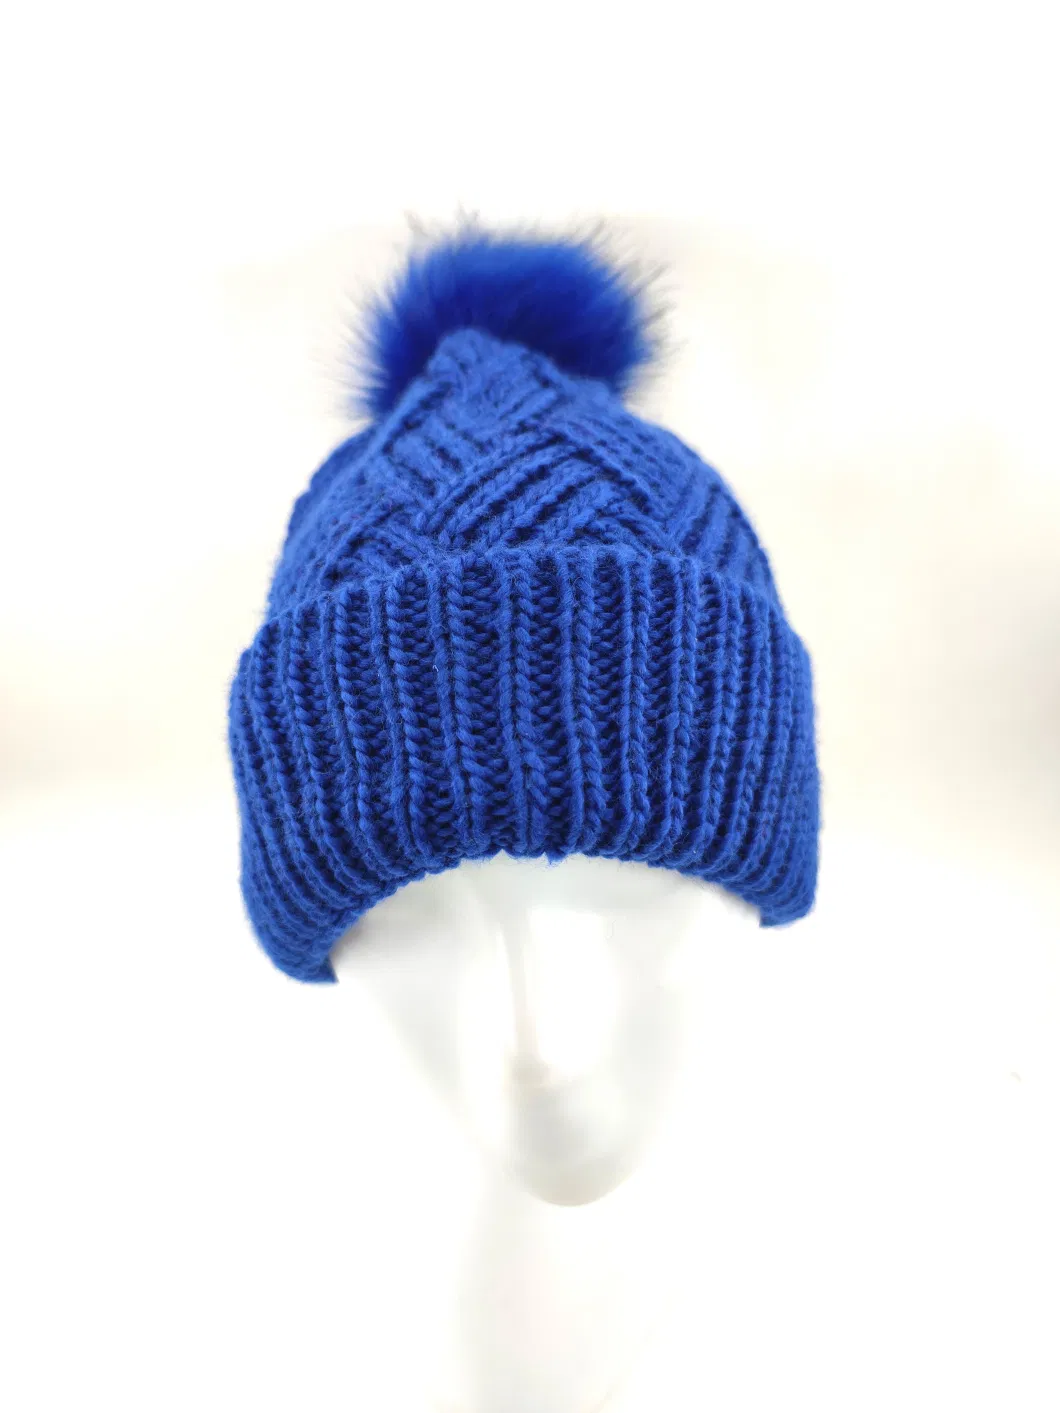 Acrylic Icelandic Yarn Jacquard Knitted Hat Turn up The Cuff with Fake Fur Pompon on Top